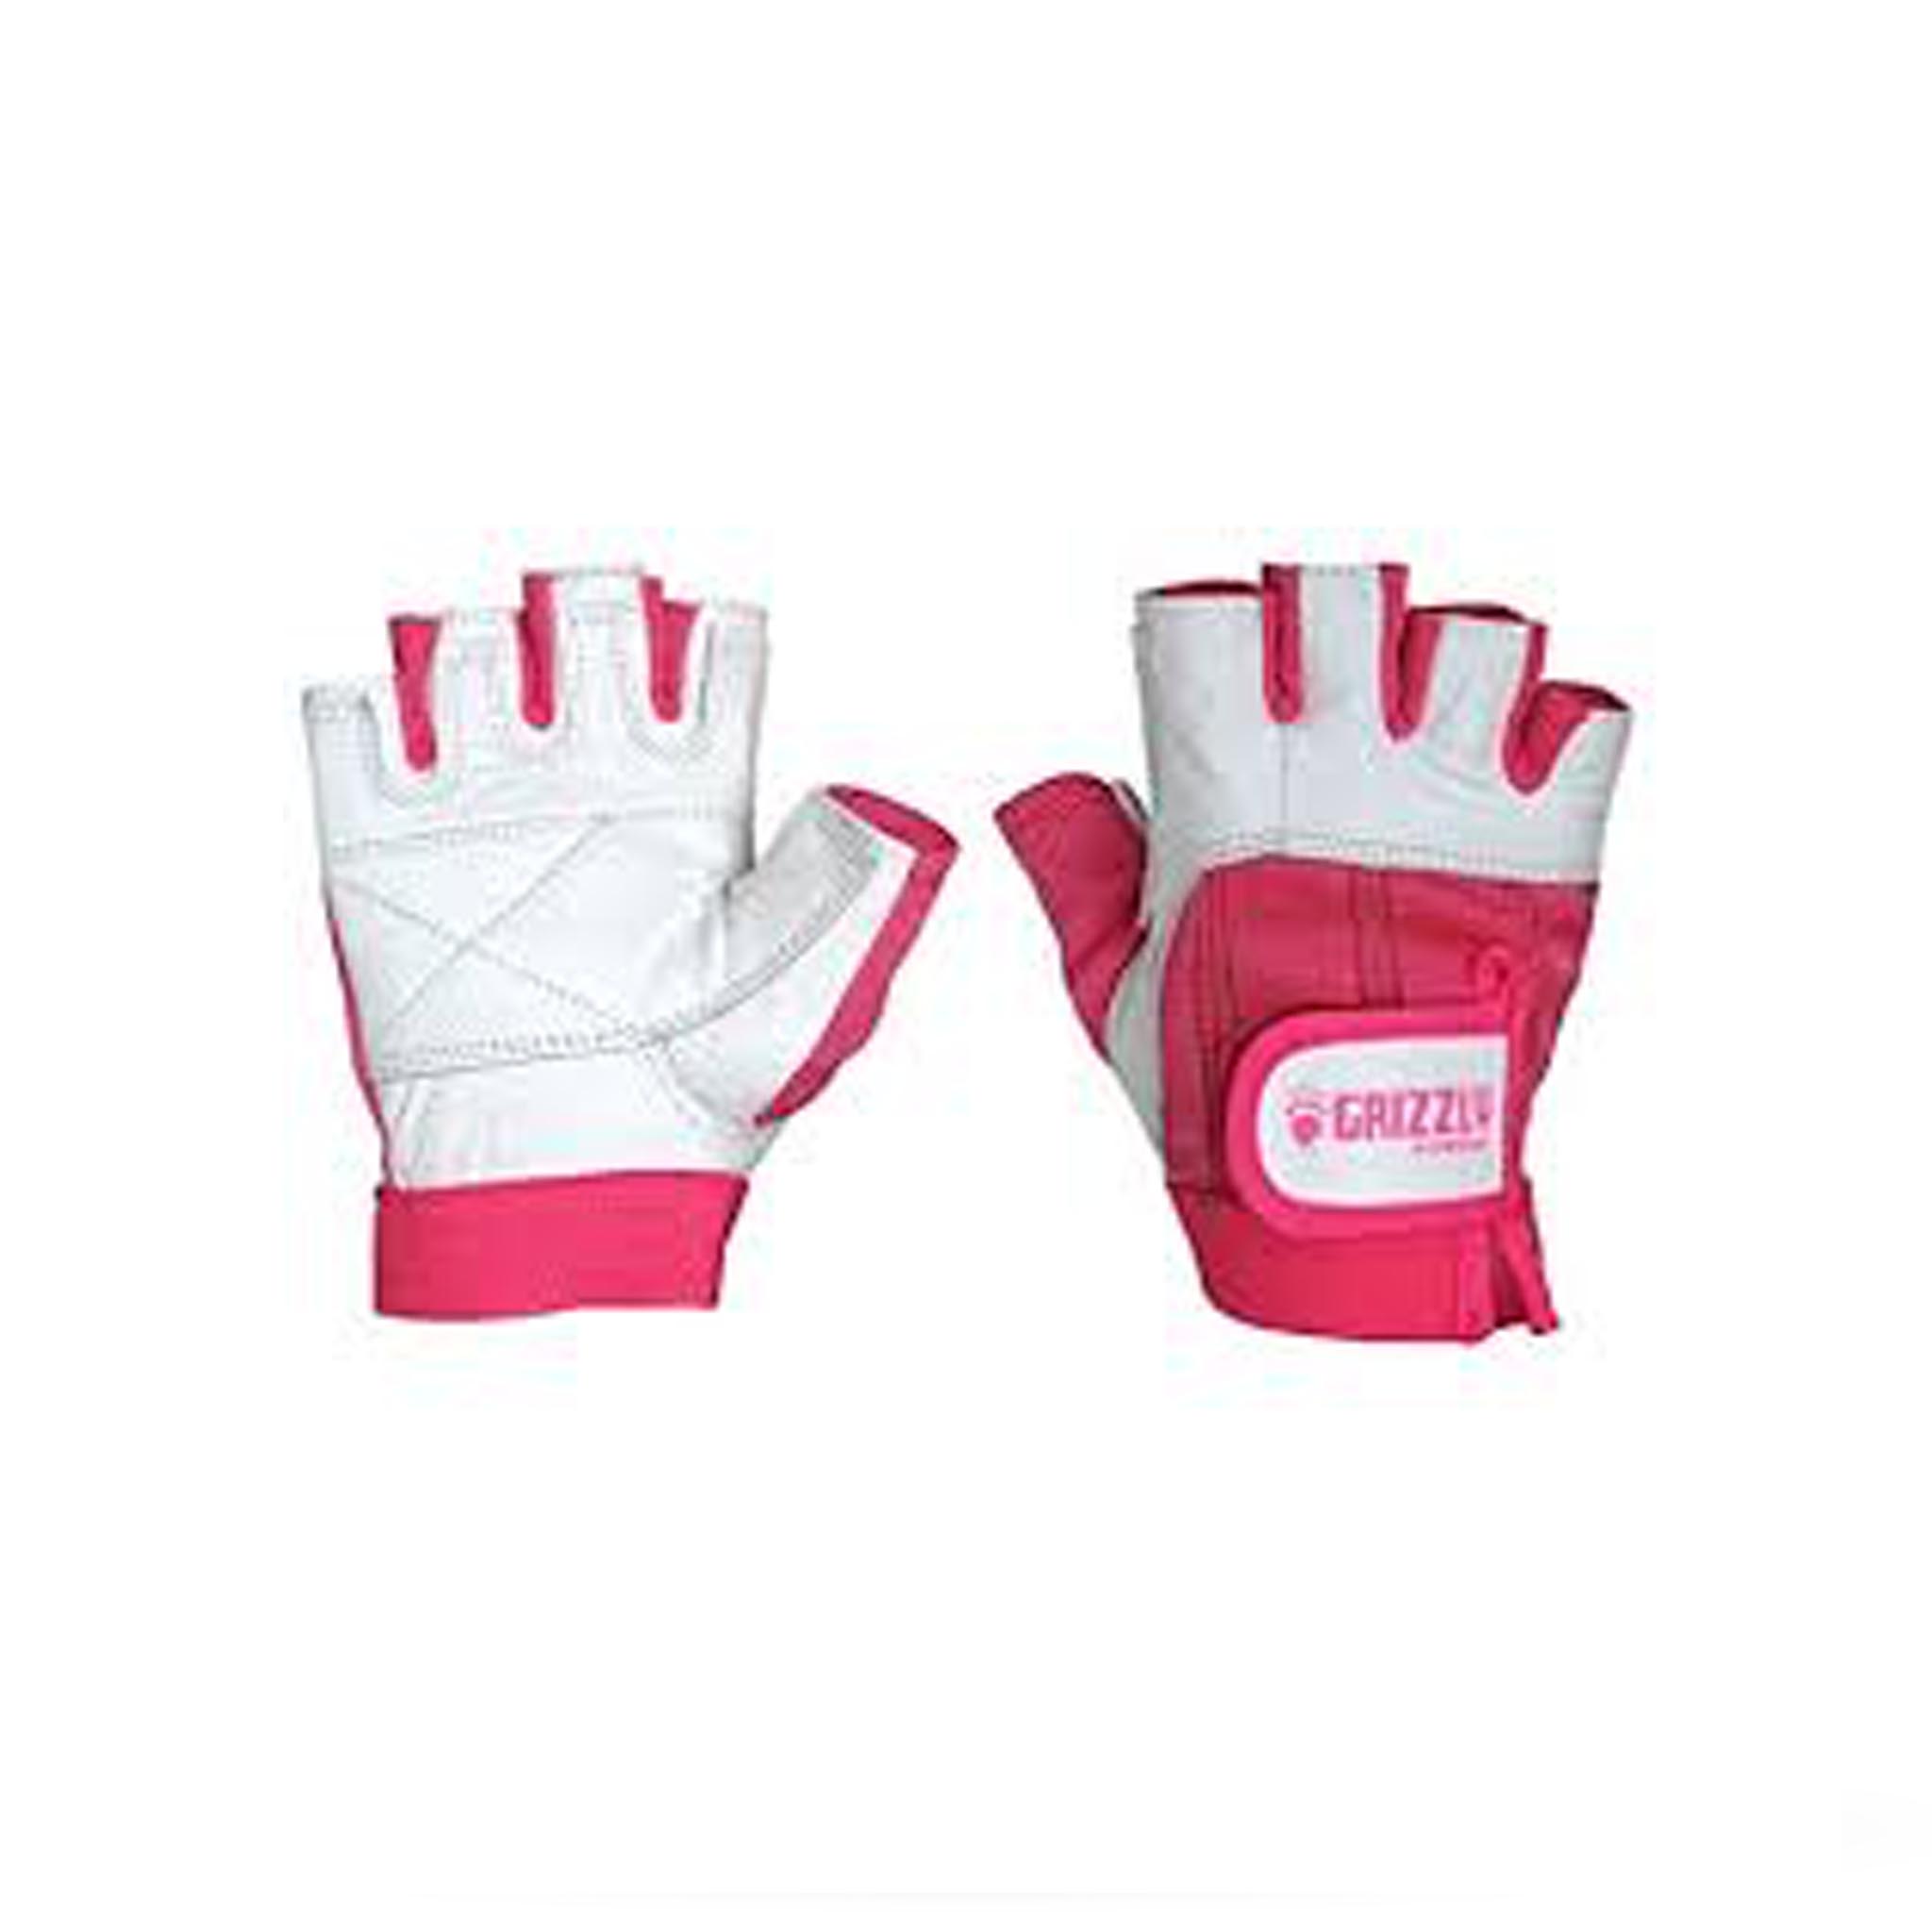 Grizzly Paws Training Gloves 8748-62 Pink & White